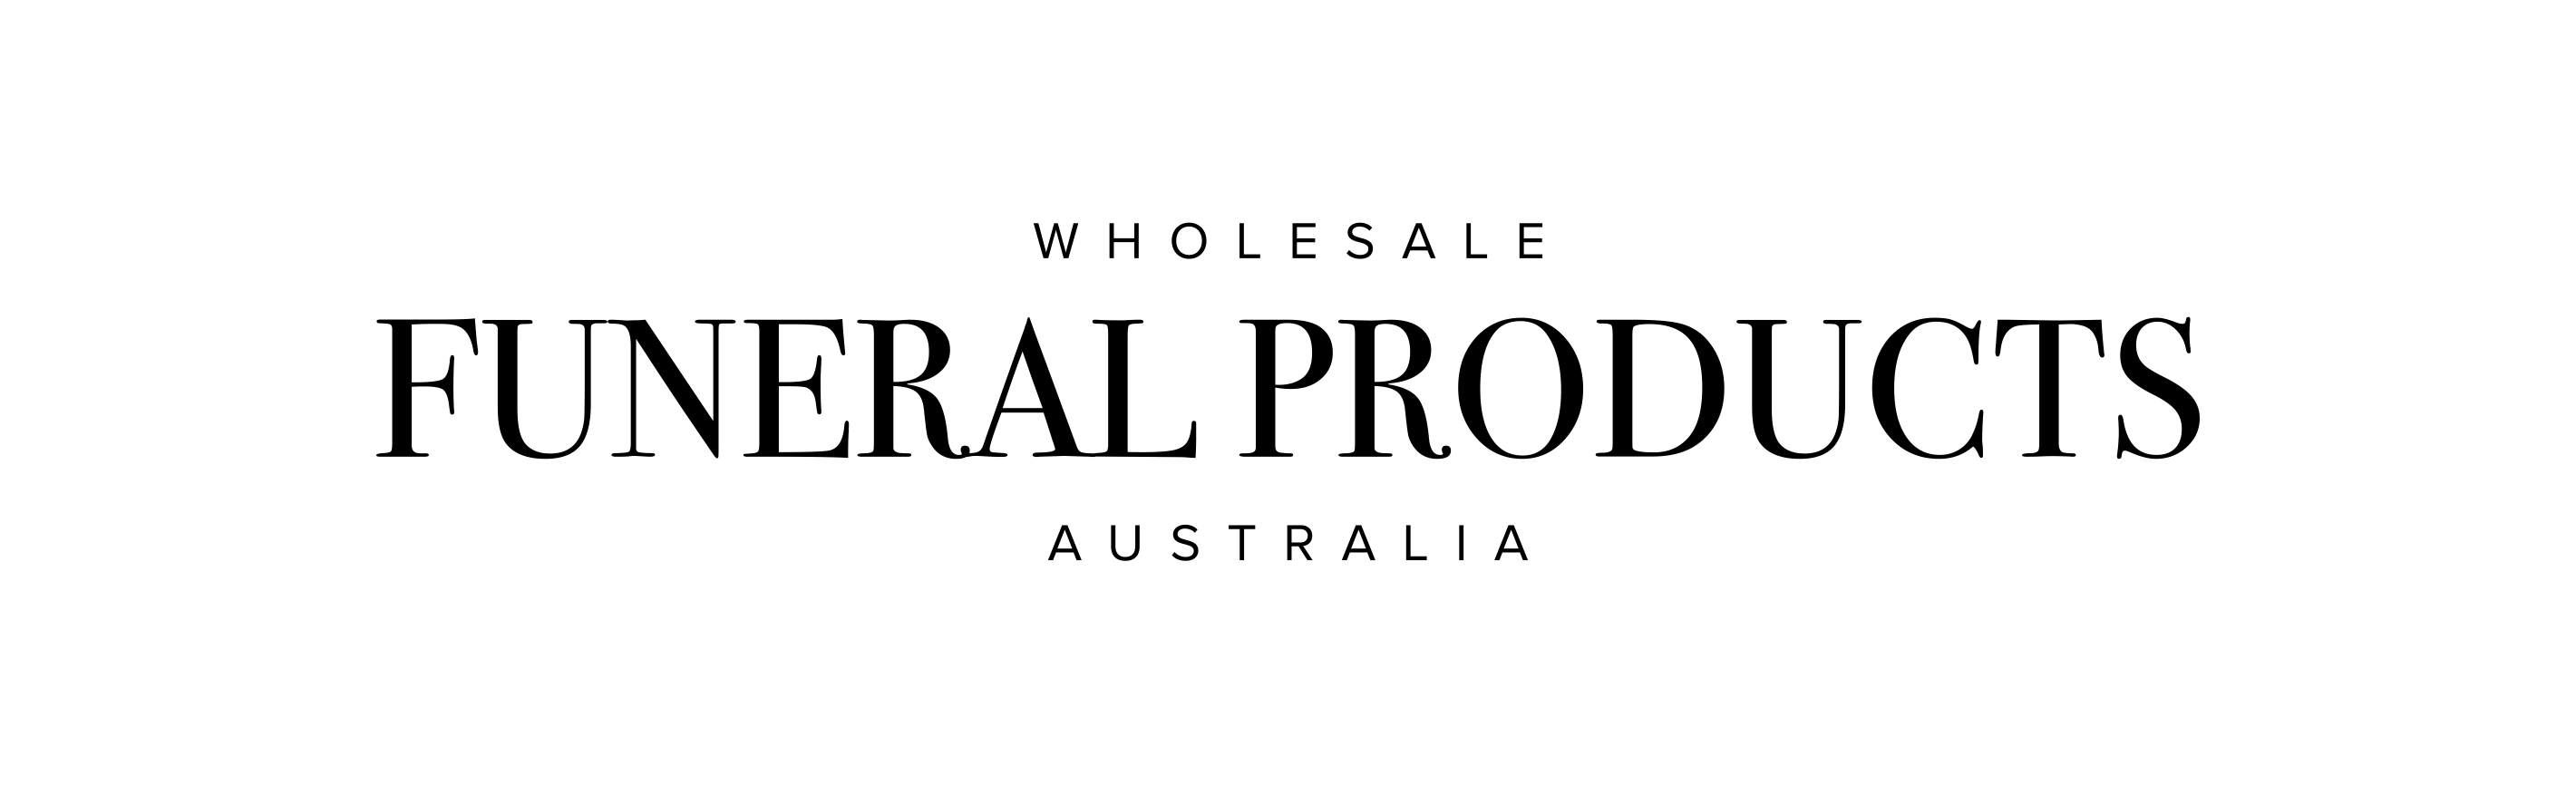 Wholesale Funeral Products Australia